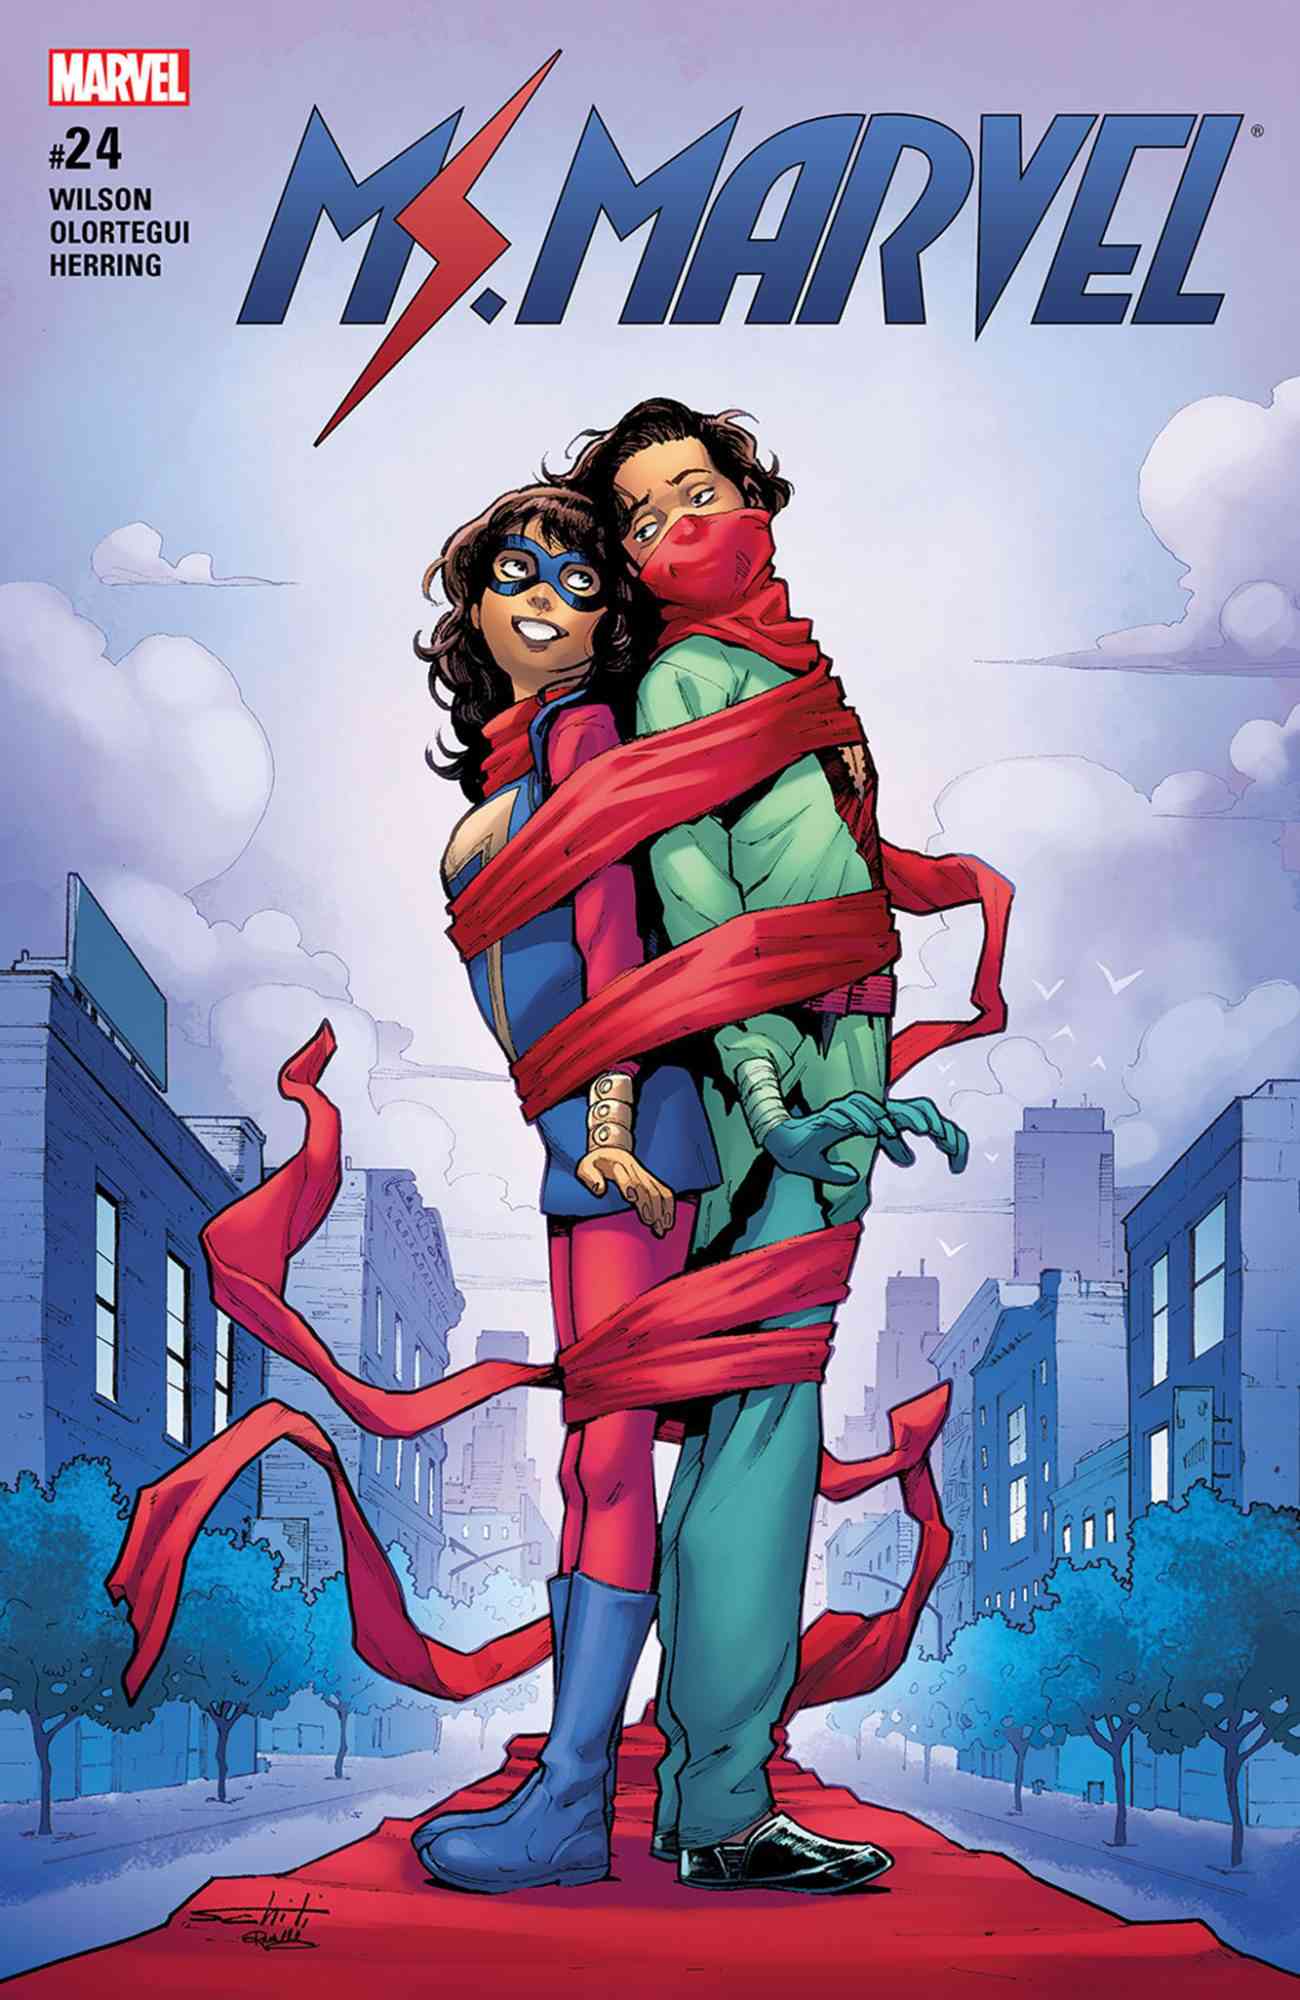 Ms. Marvel (2015-2019) #24 by G. Willow Wilson